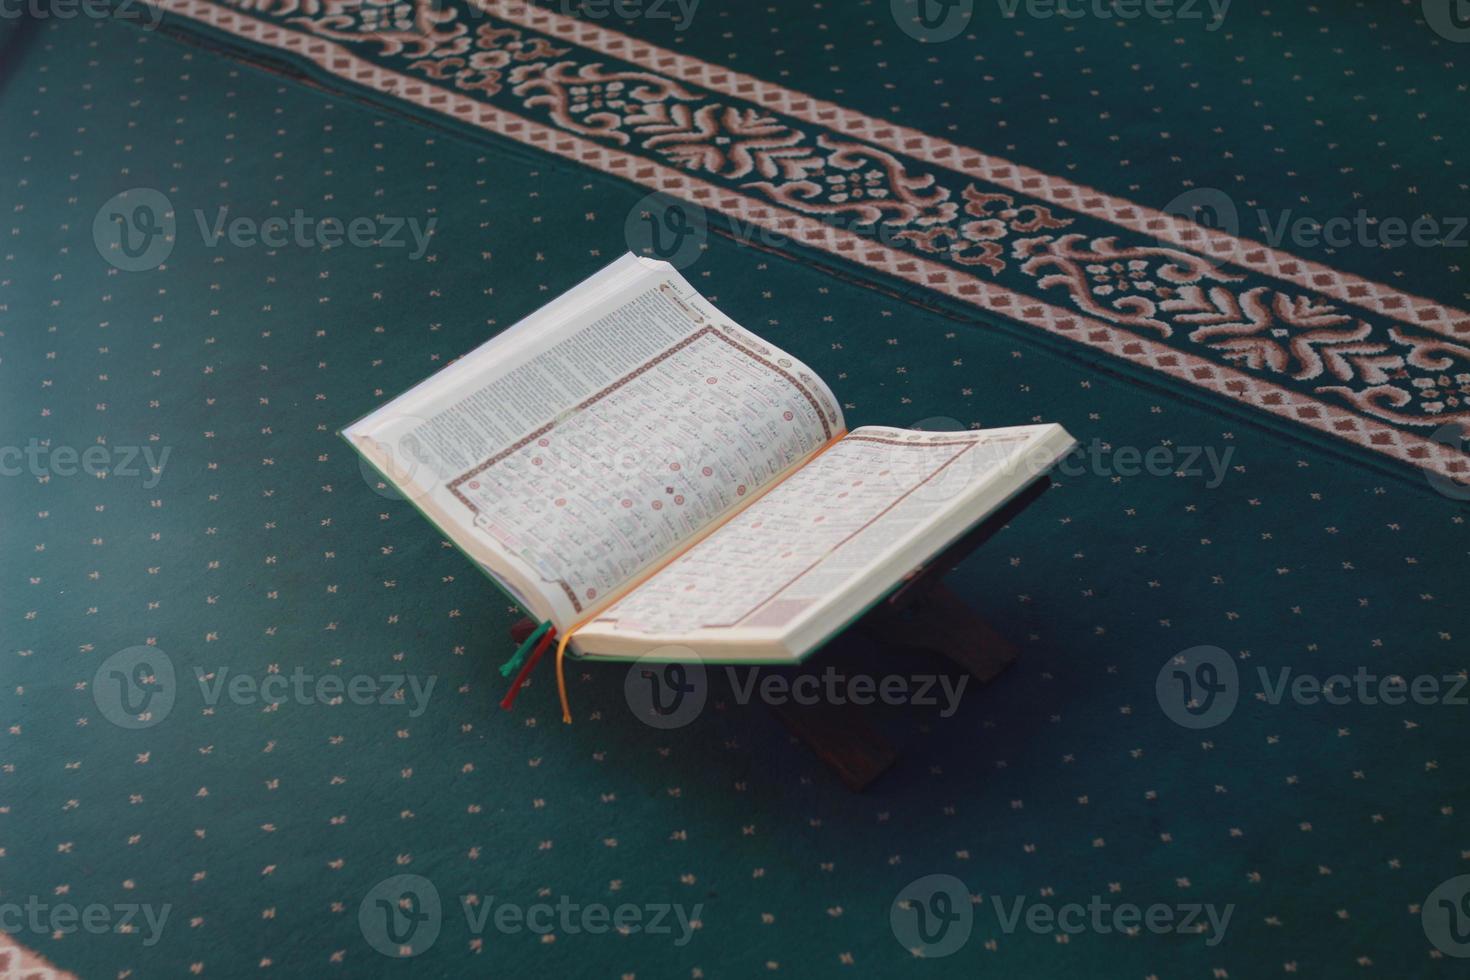 a close up of the holy book Al-Quran on a green prayer rug. Islamic photo concept.